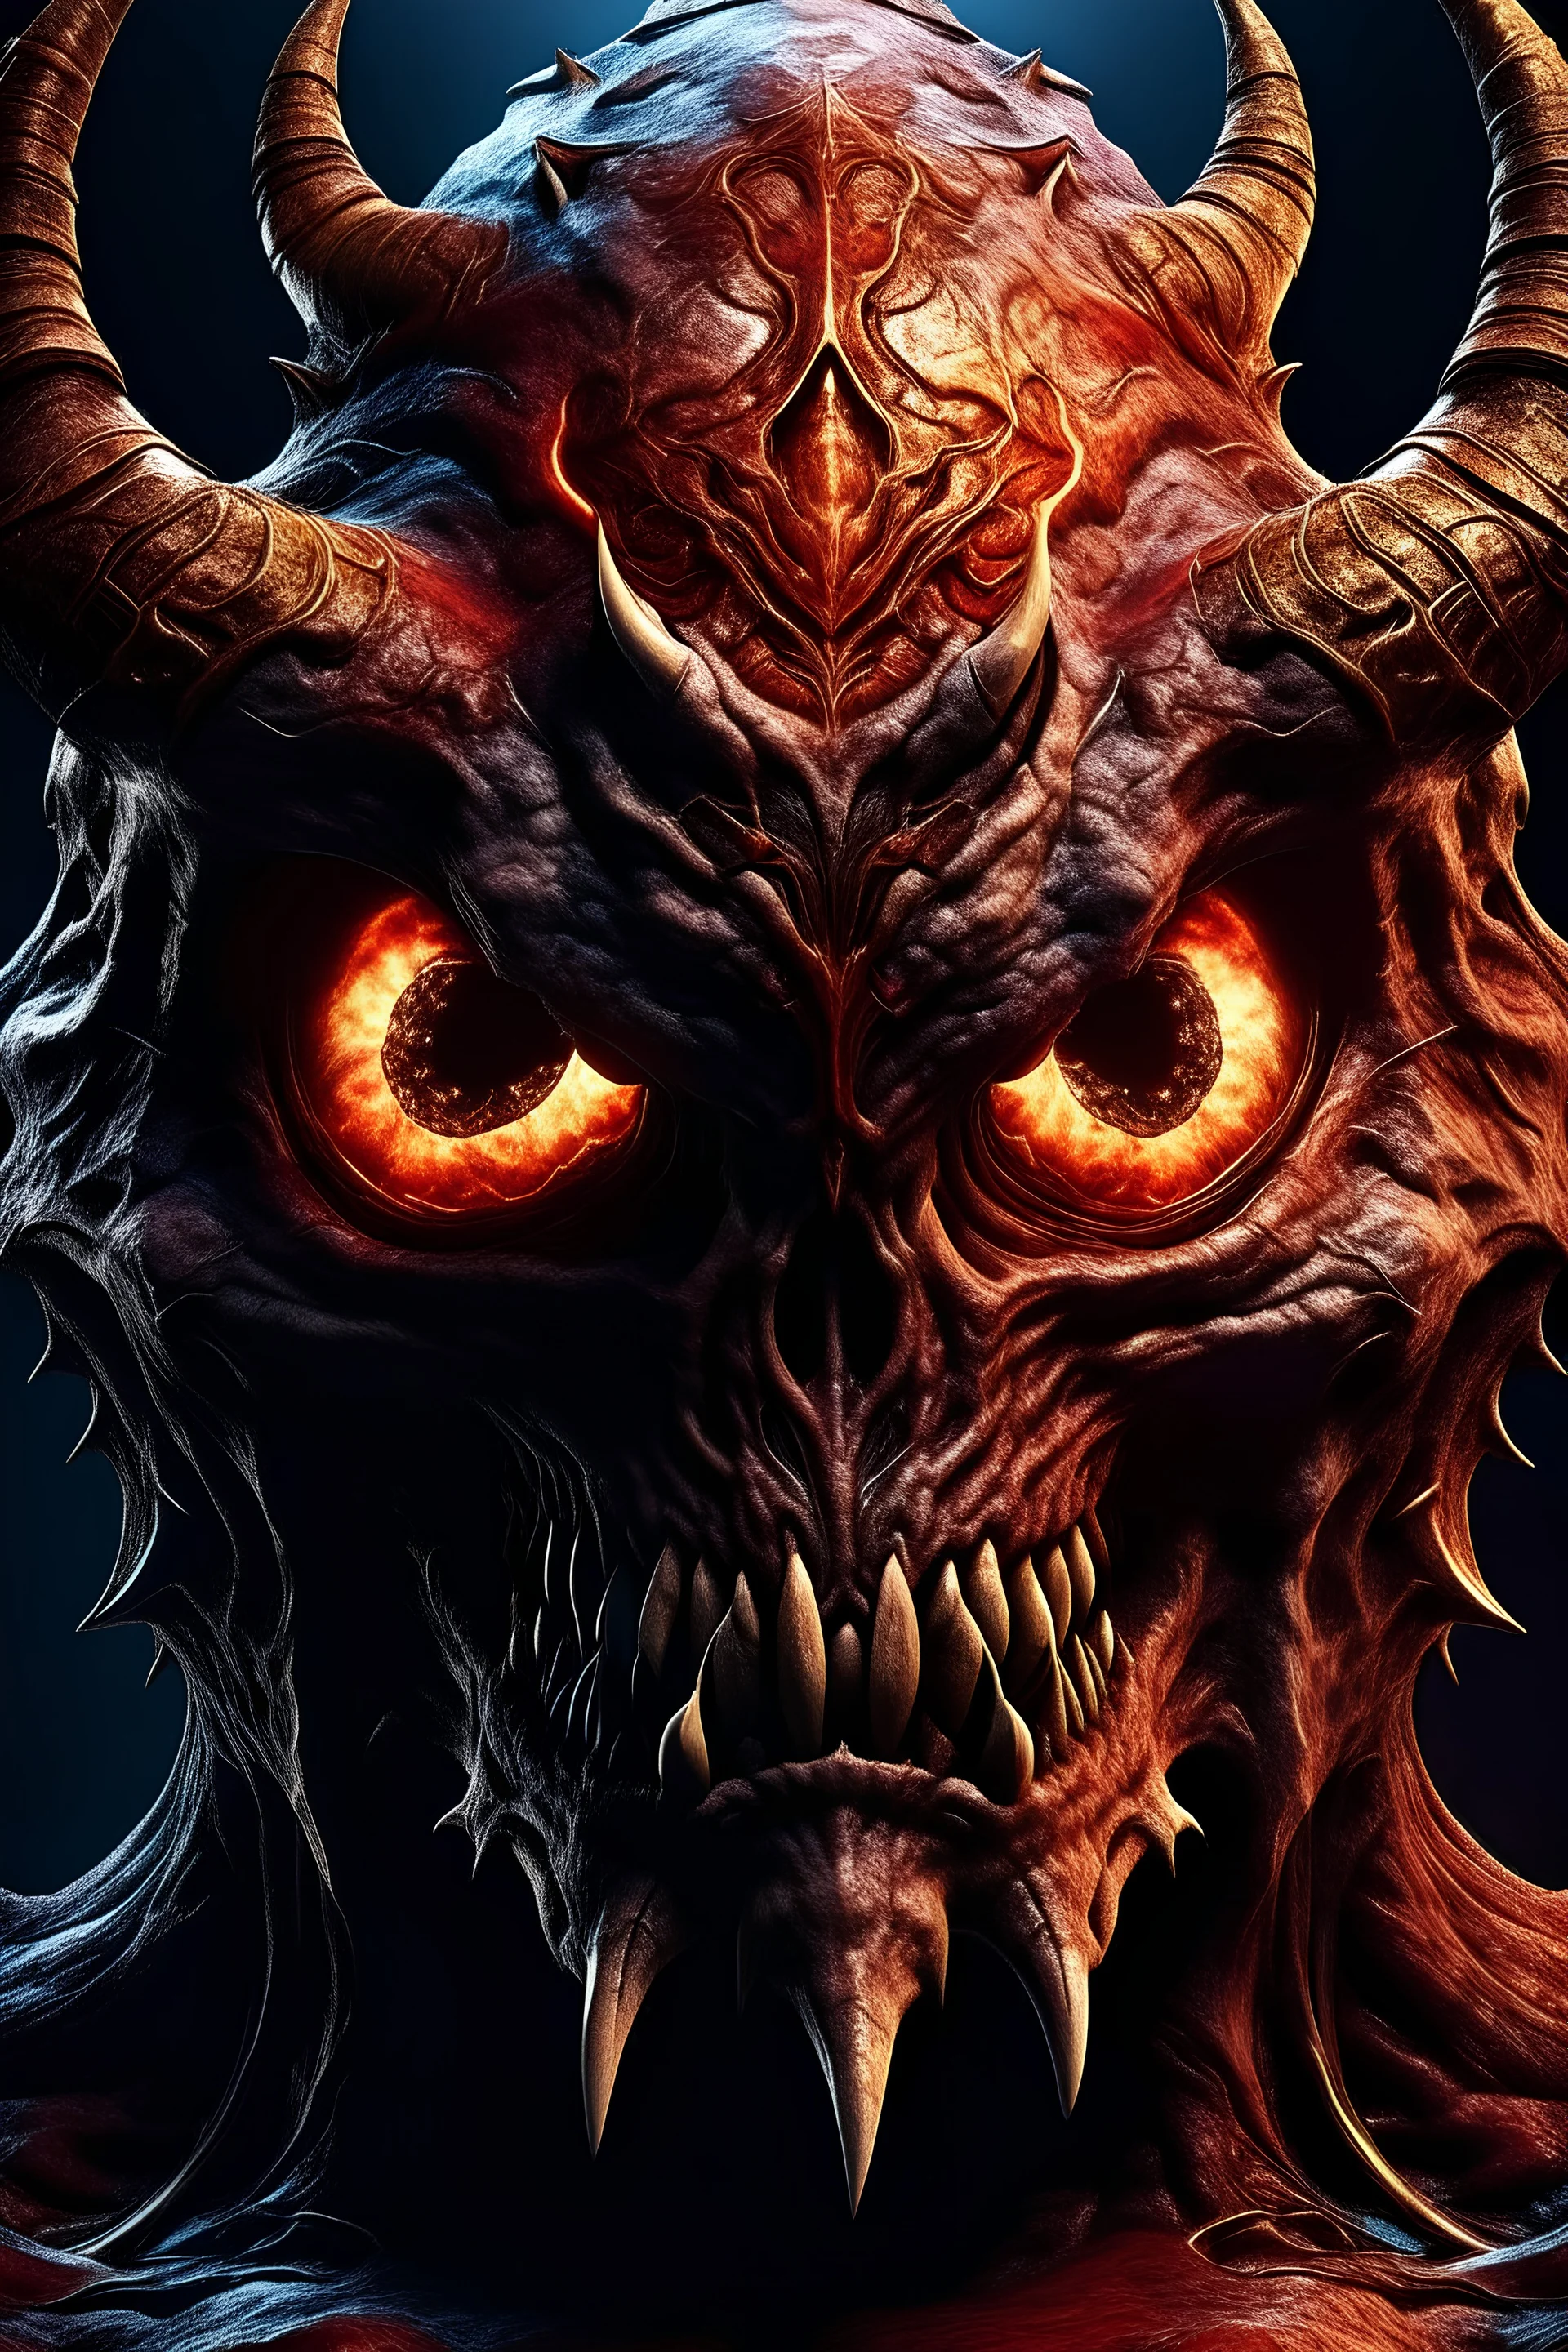 face of a doom game monster demon big bloody monster with muscular human shape body with horns killed a human corps in the hand